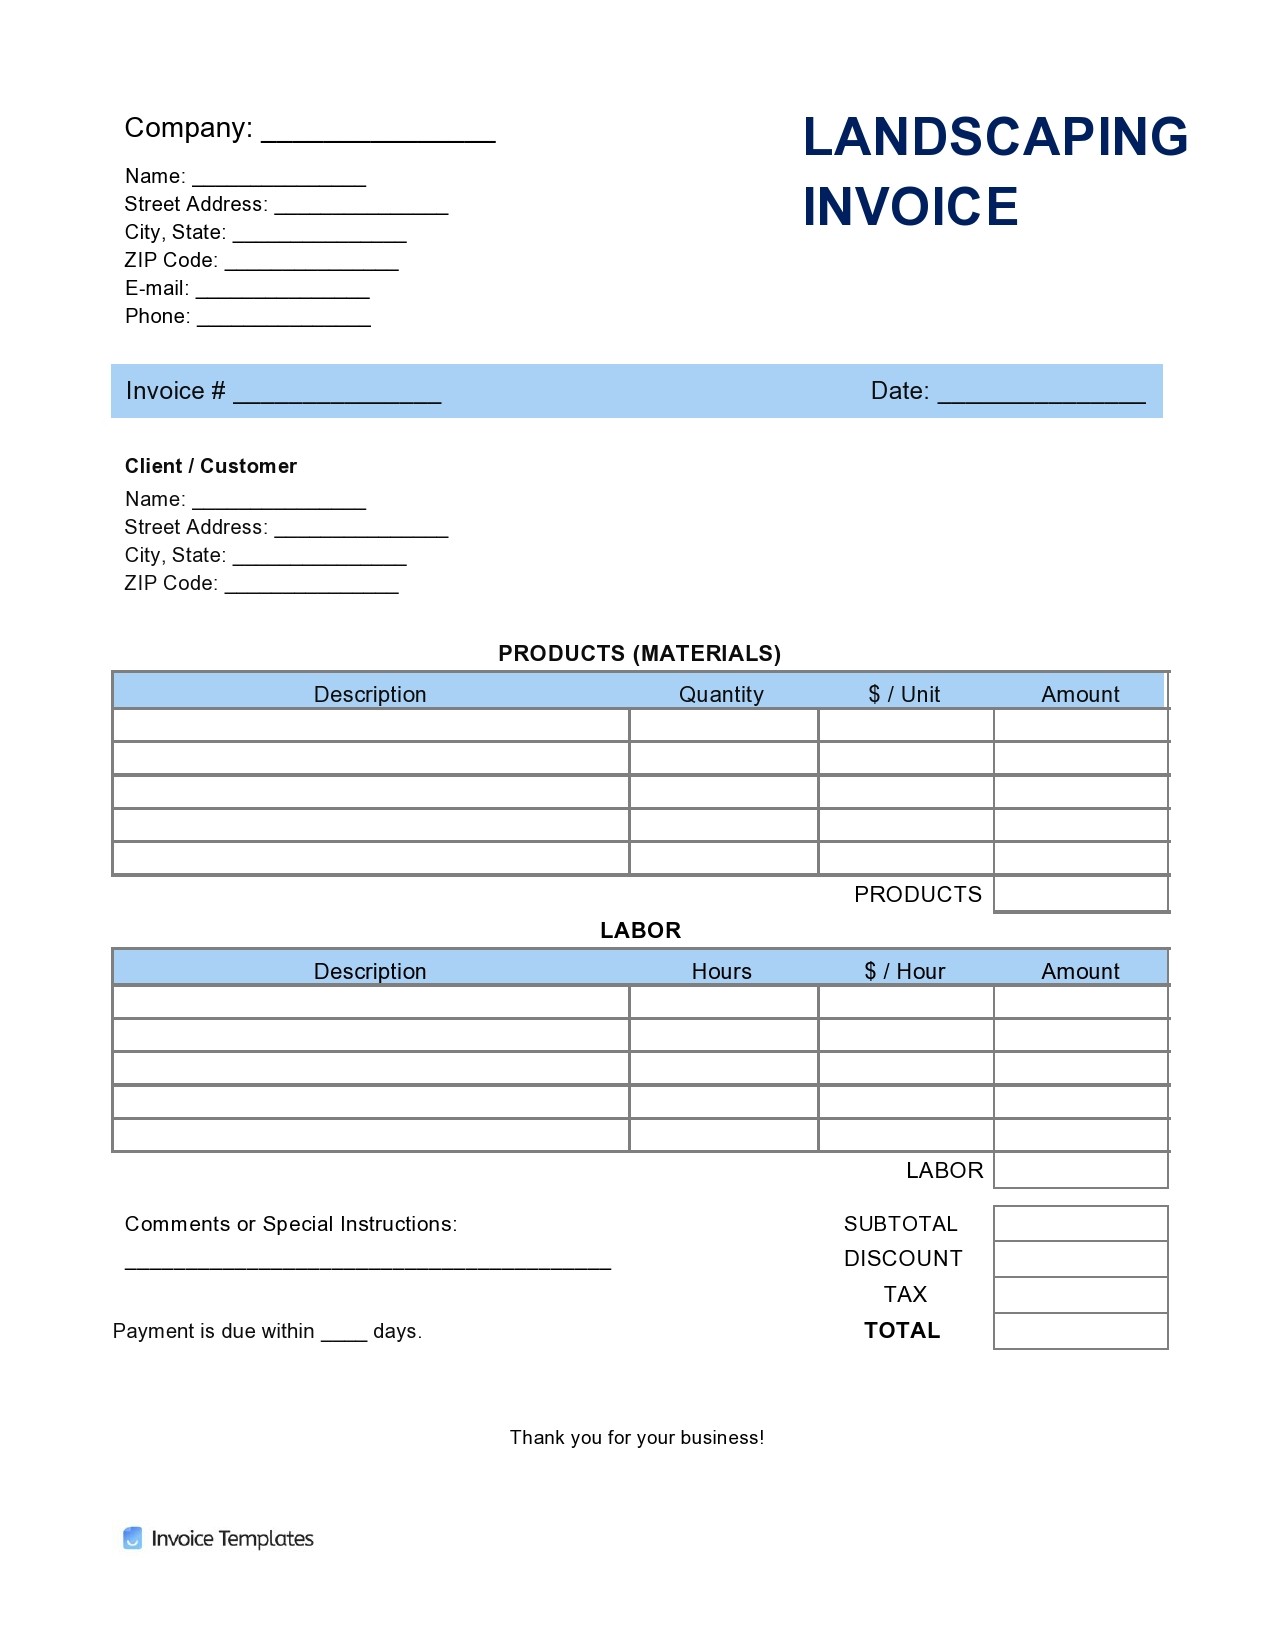 Free landscaping invoice 01